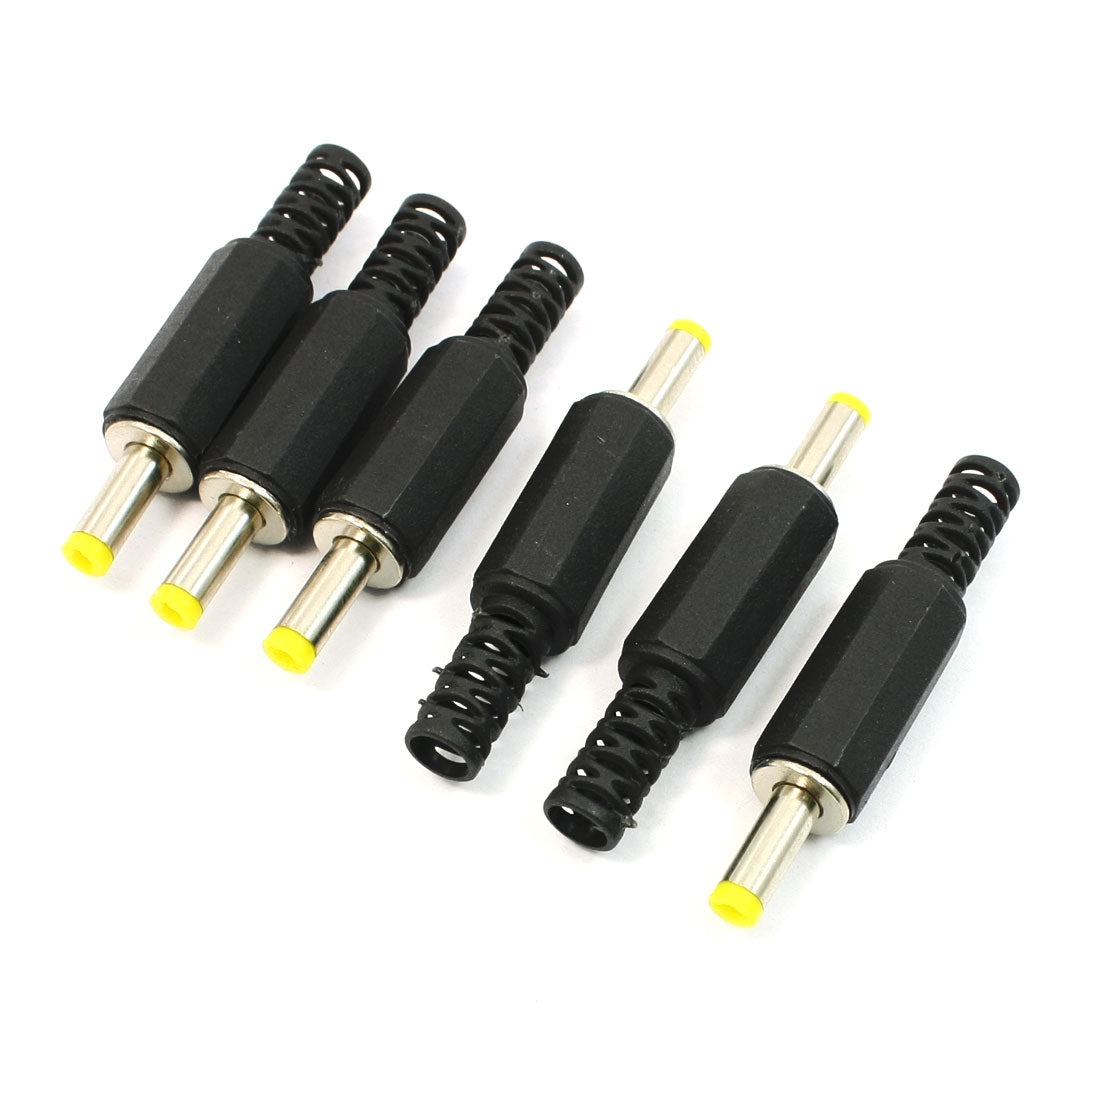 uxcell Uxcell 6Pcs Plastic Cable Guard 4.0 x 1.7mm Male DC Power Plugs Connectors